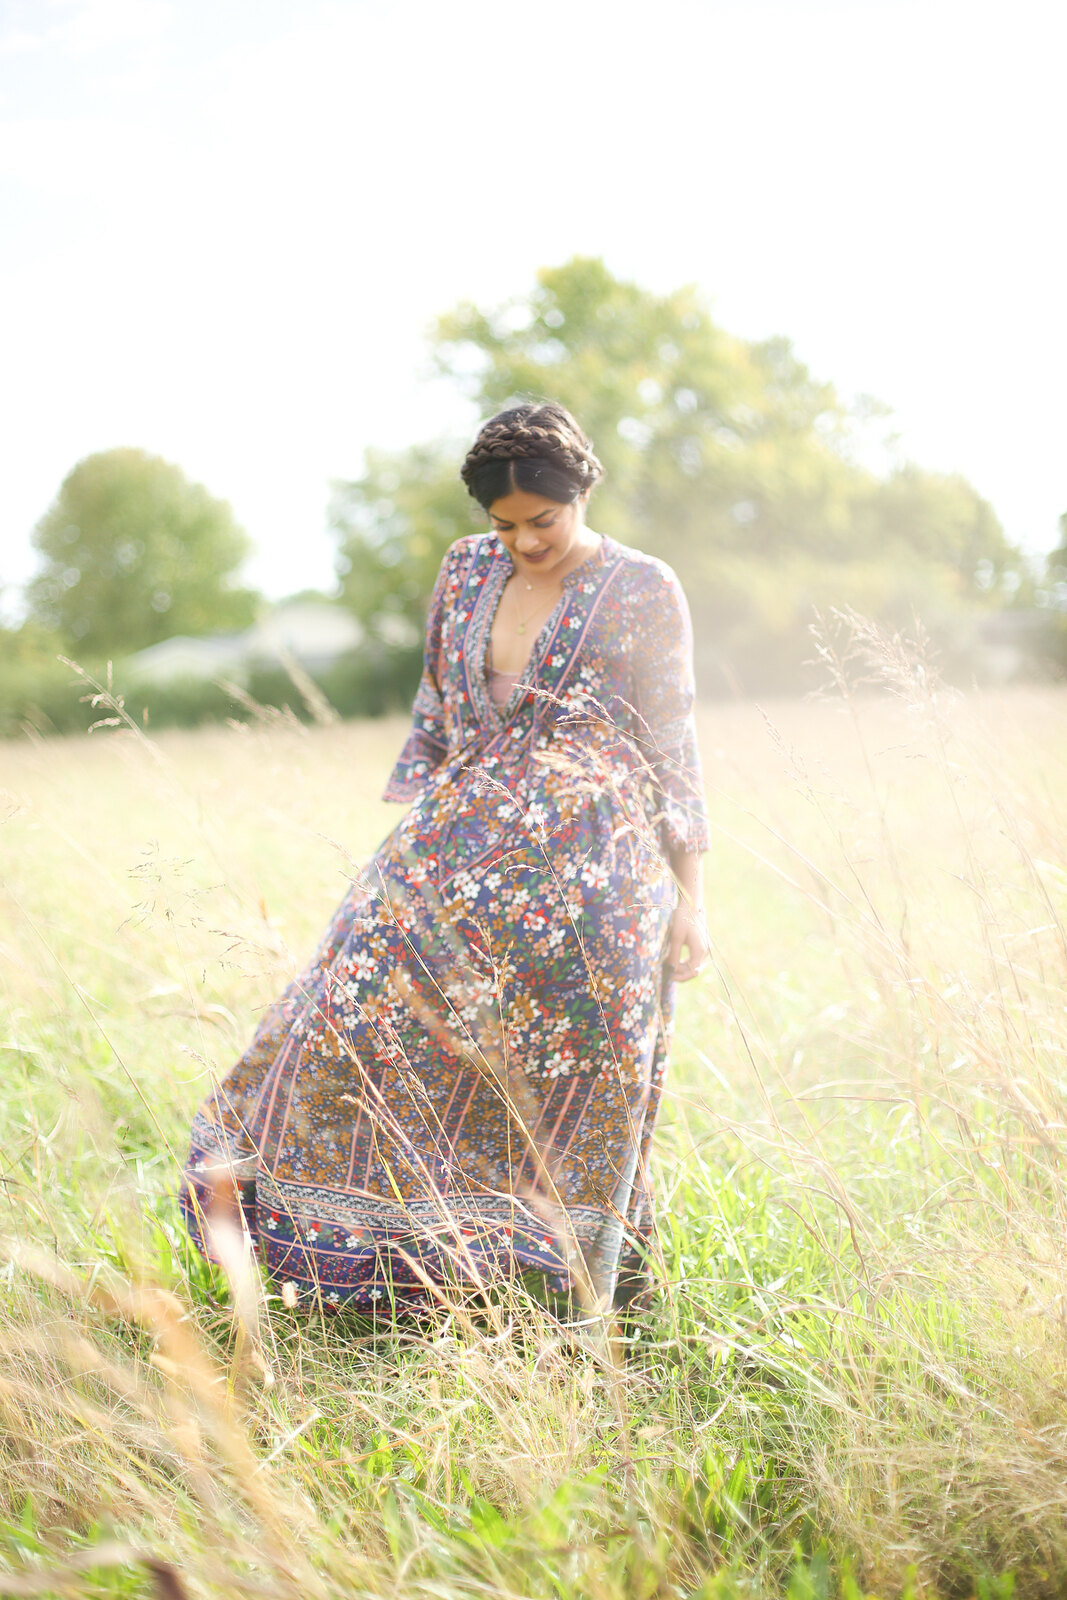 Priya the Blog, Nashville style blog, Nashville style blogger, Nashville fashion blog, Nashville fashion blogger, Vinnie Louise Nashville, ColourPop Lippie Stix in Lumiere, stackable necklaces, Fall outfit, how to wear a floral maxi dress, Rag & Bone Harrow booties, Fall outfit with floral maxi dress